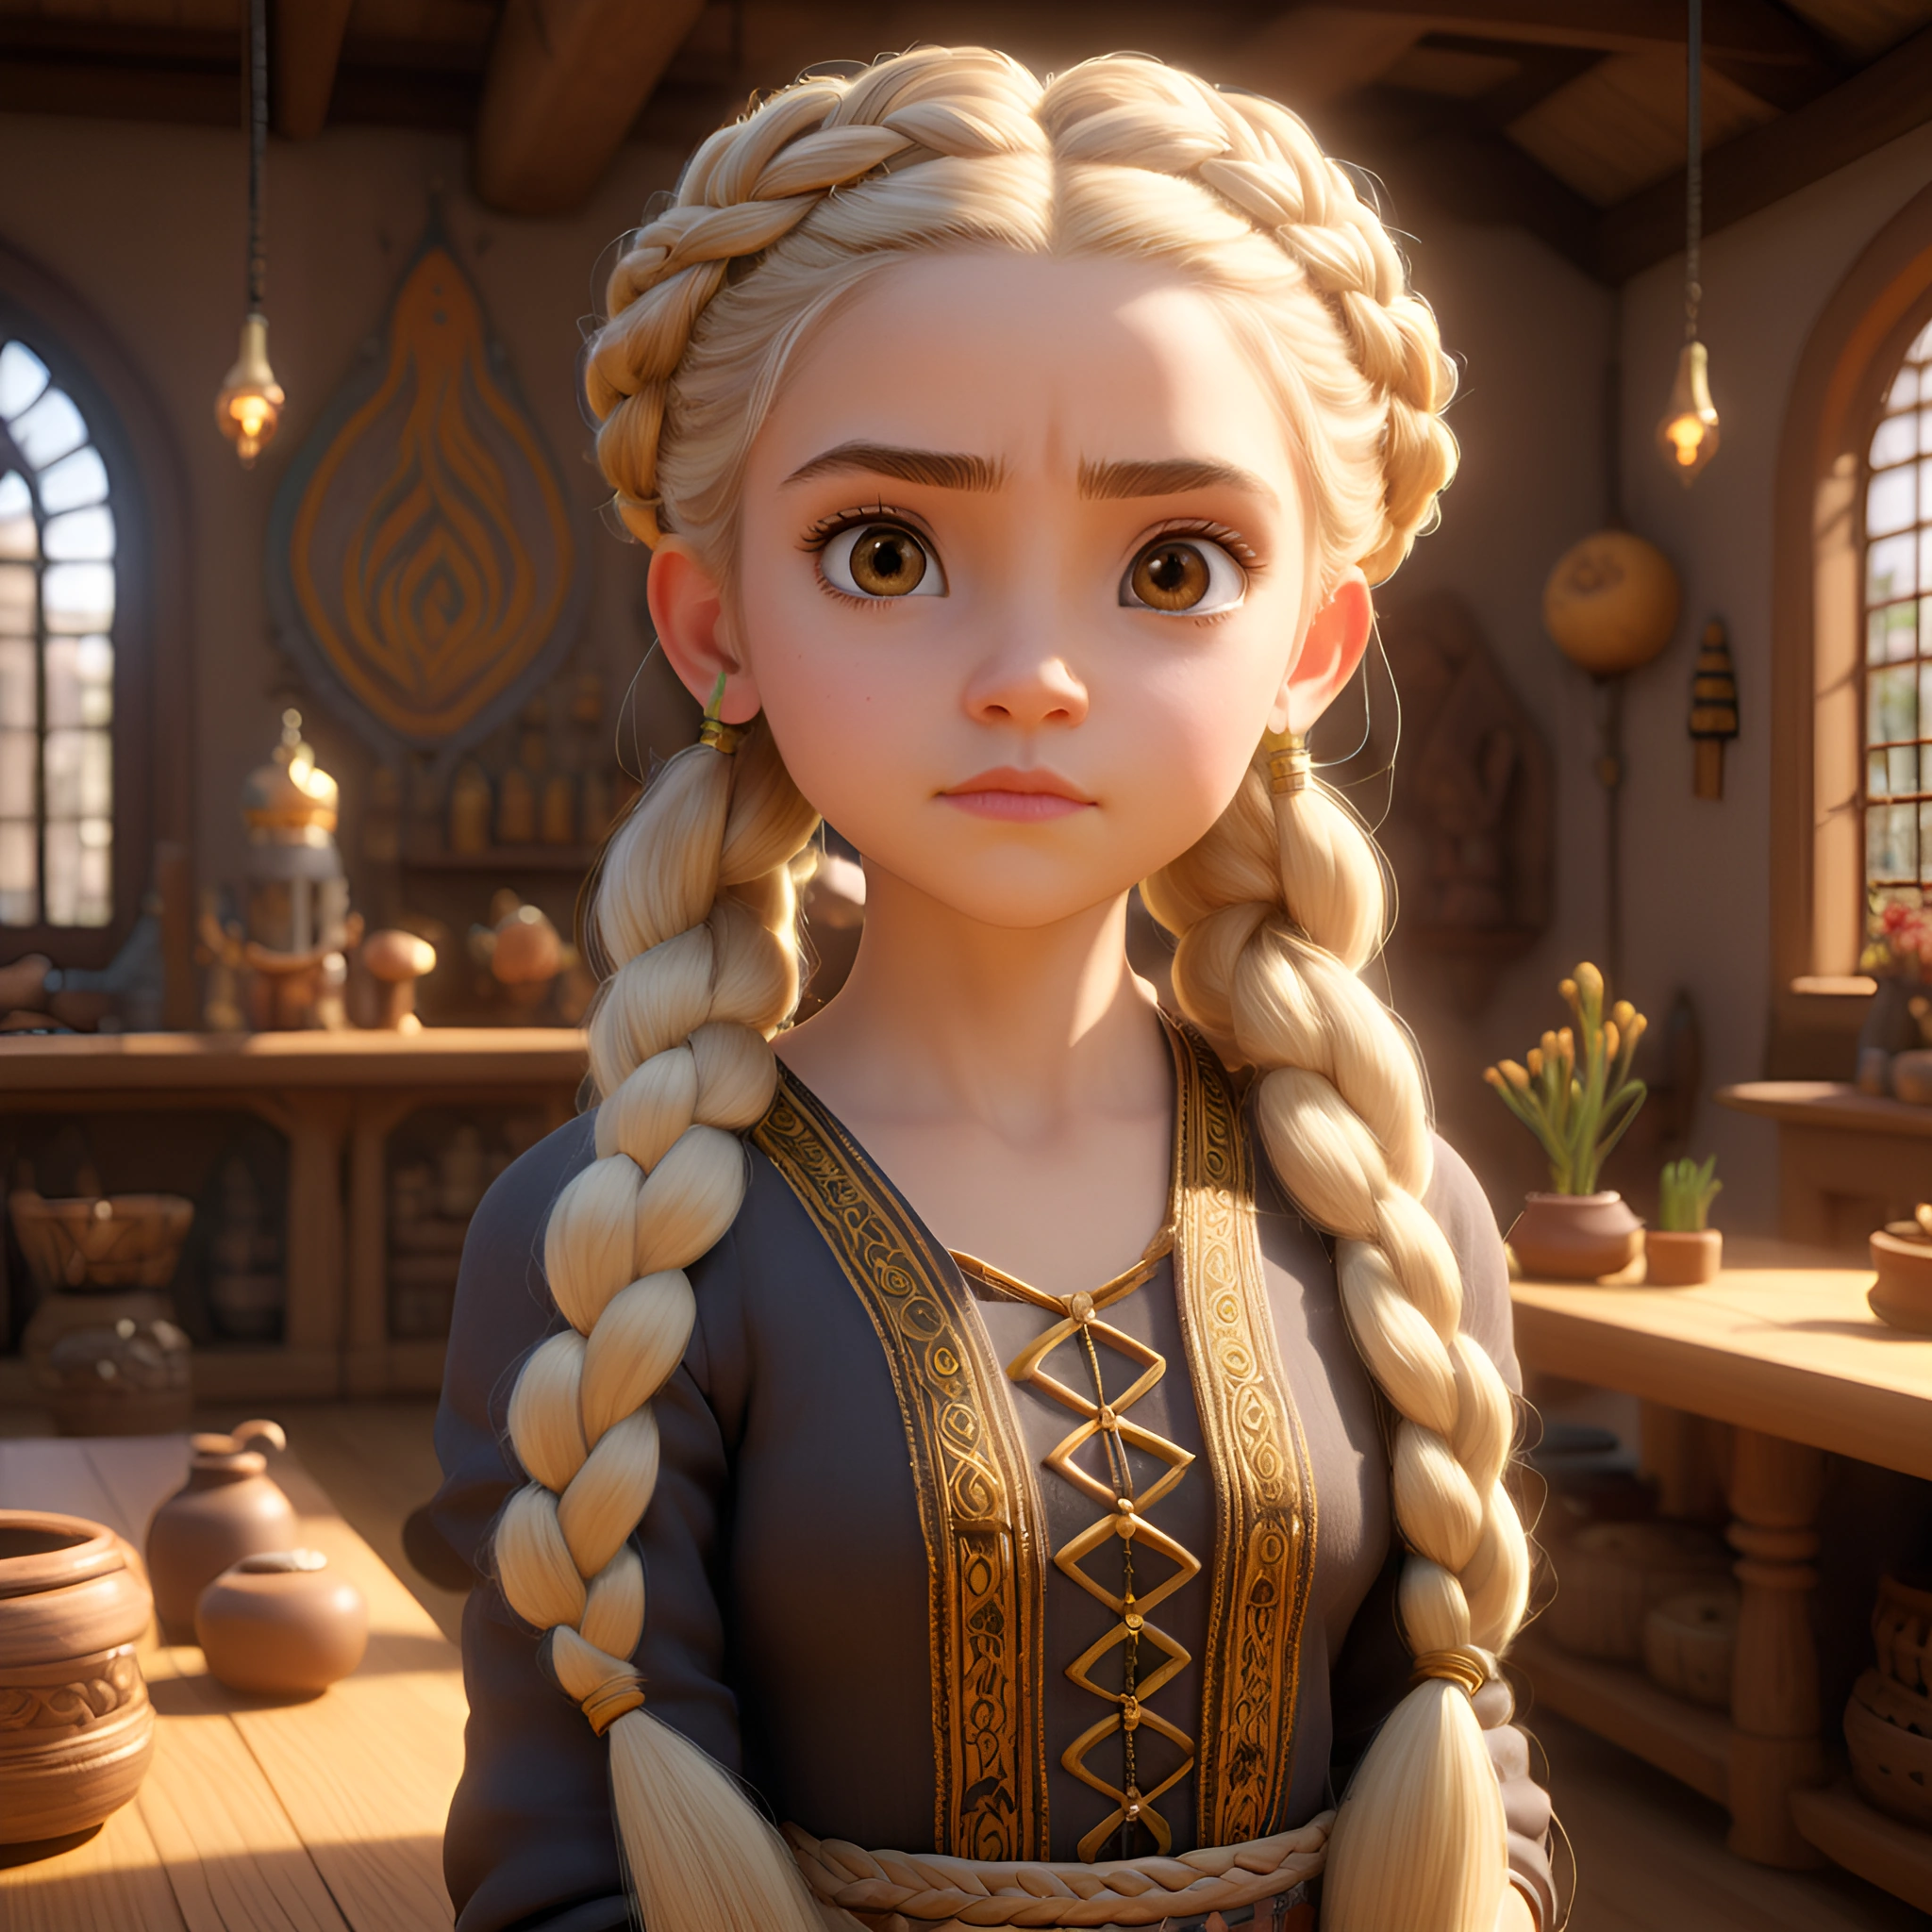 blonde haired girl with braids in a medieval setting